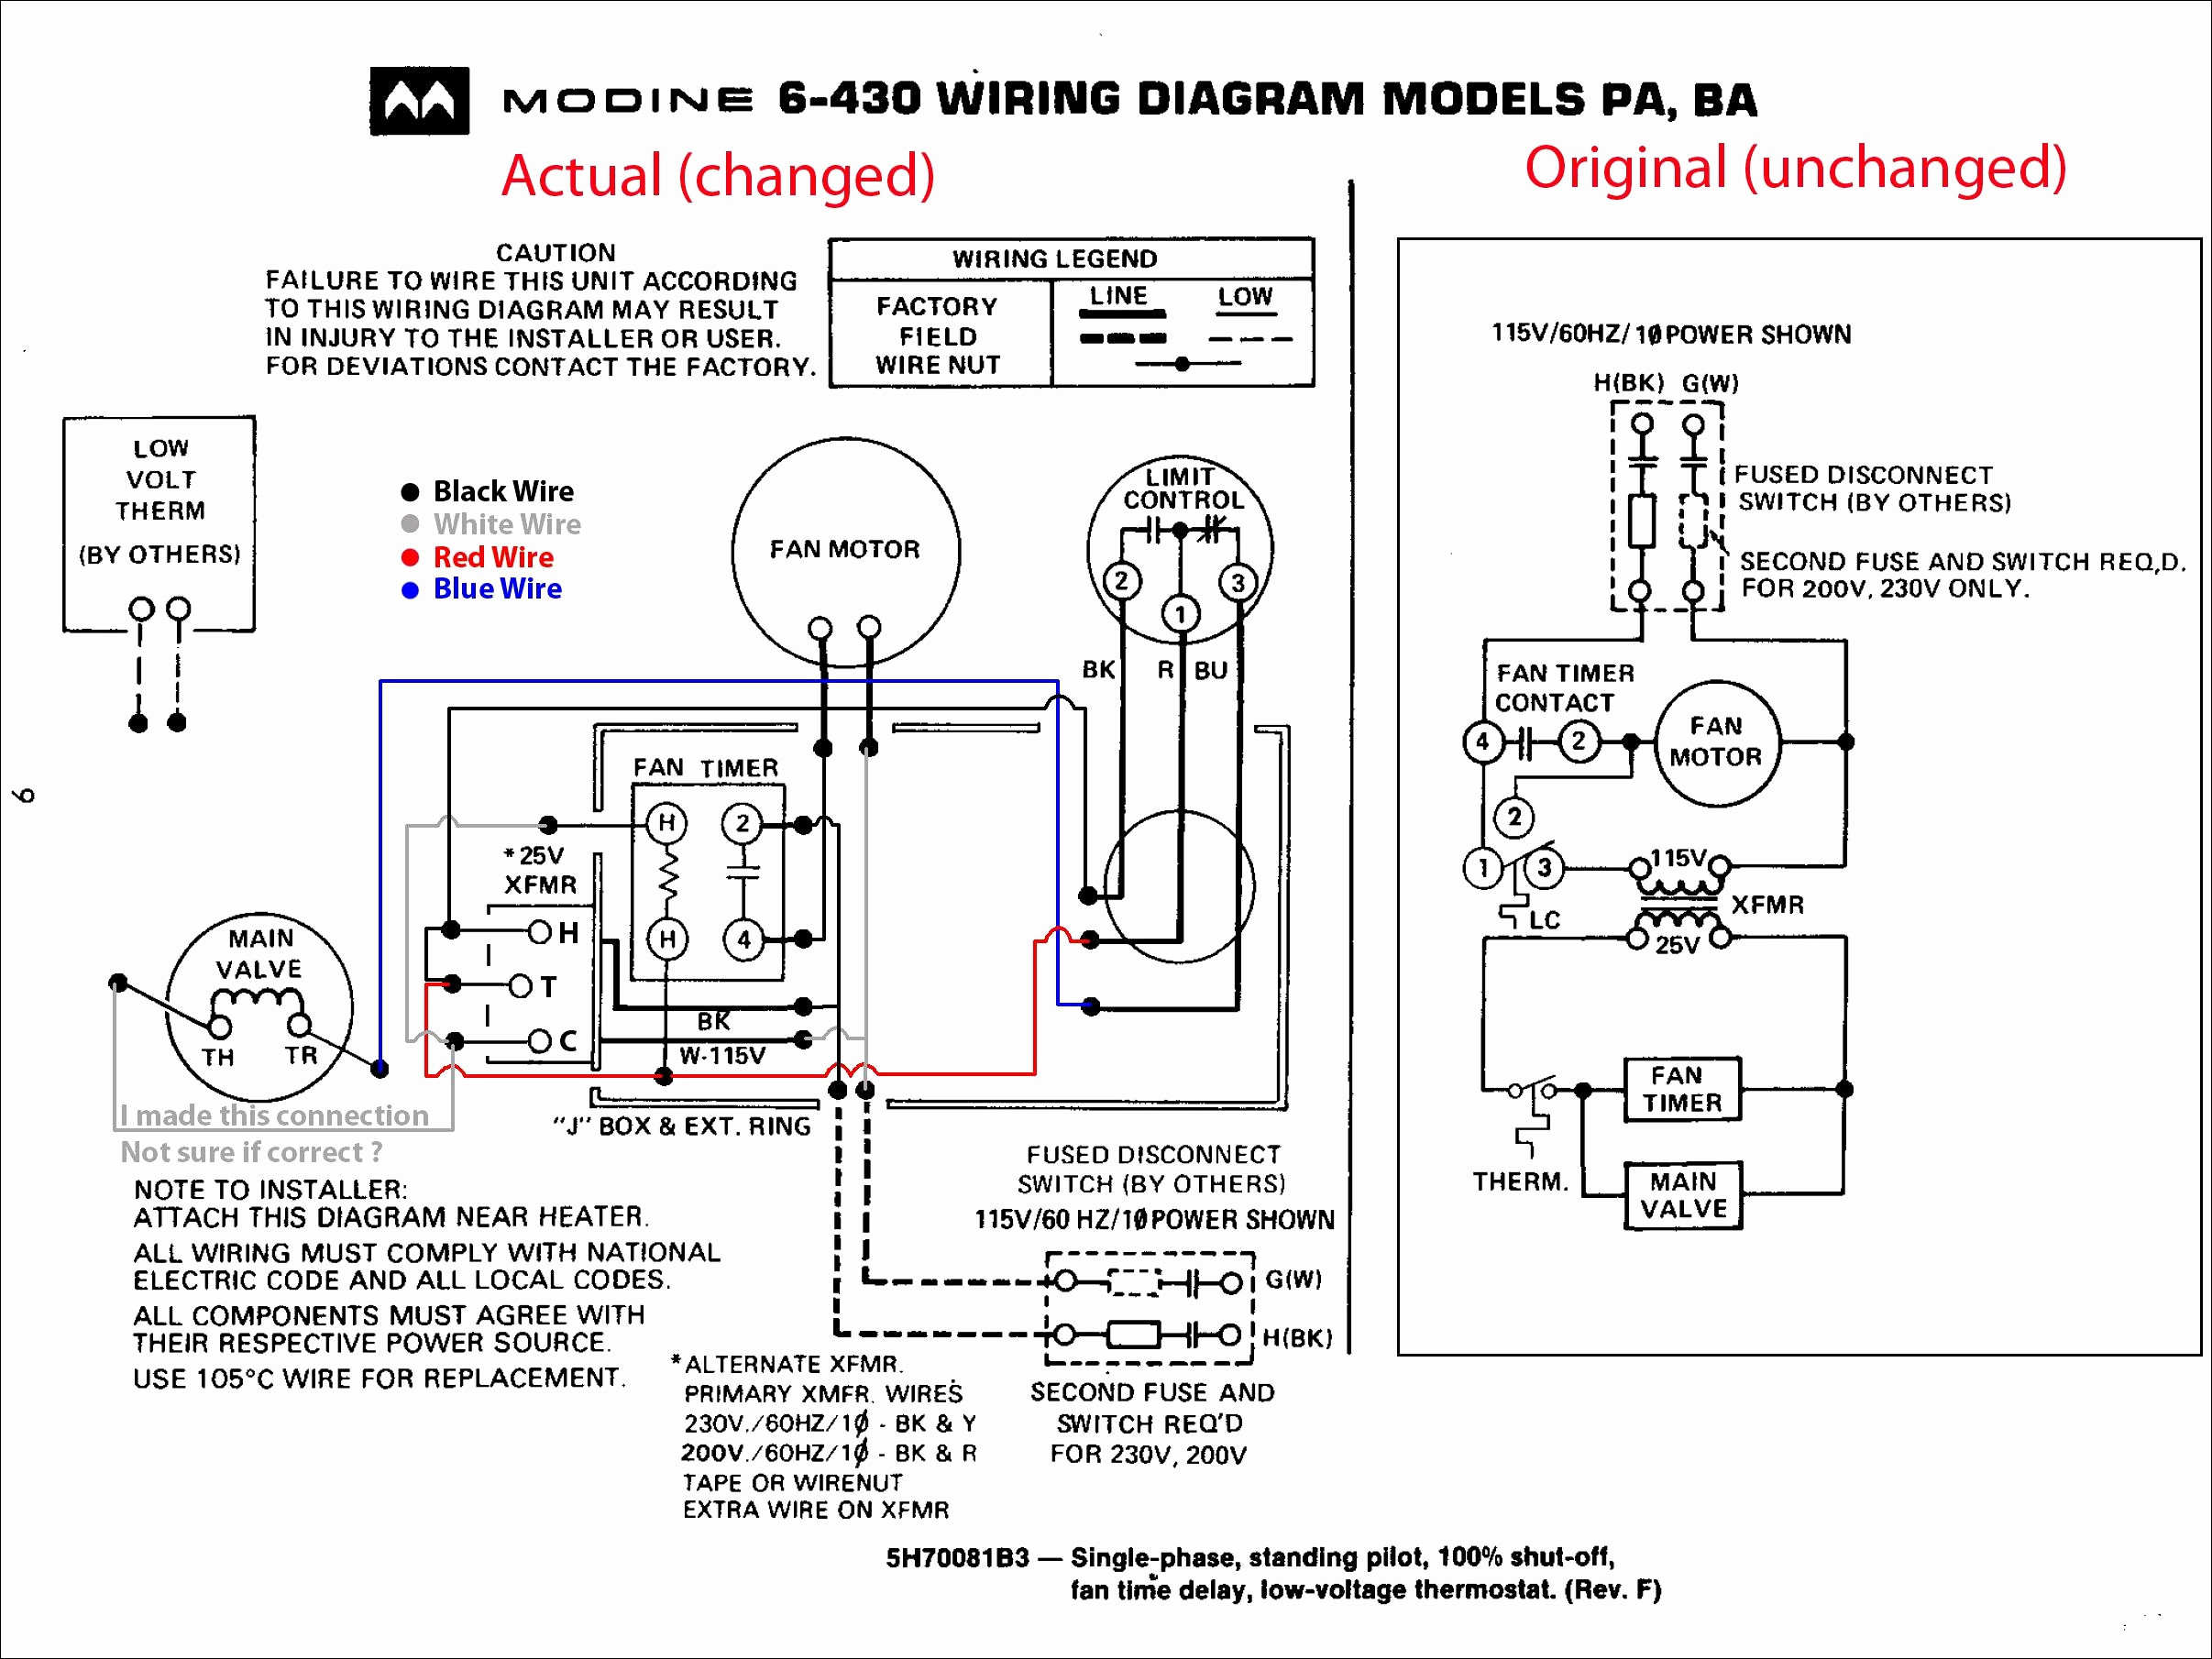 Harbor Freight Camera Wire Diagram | Wiring Diagram - Harbor Freight Security Camera Wiring Diagram